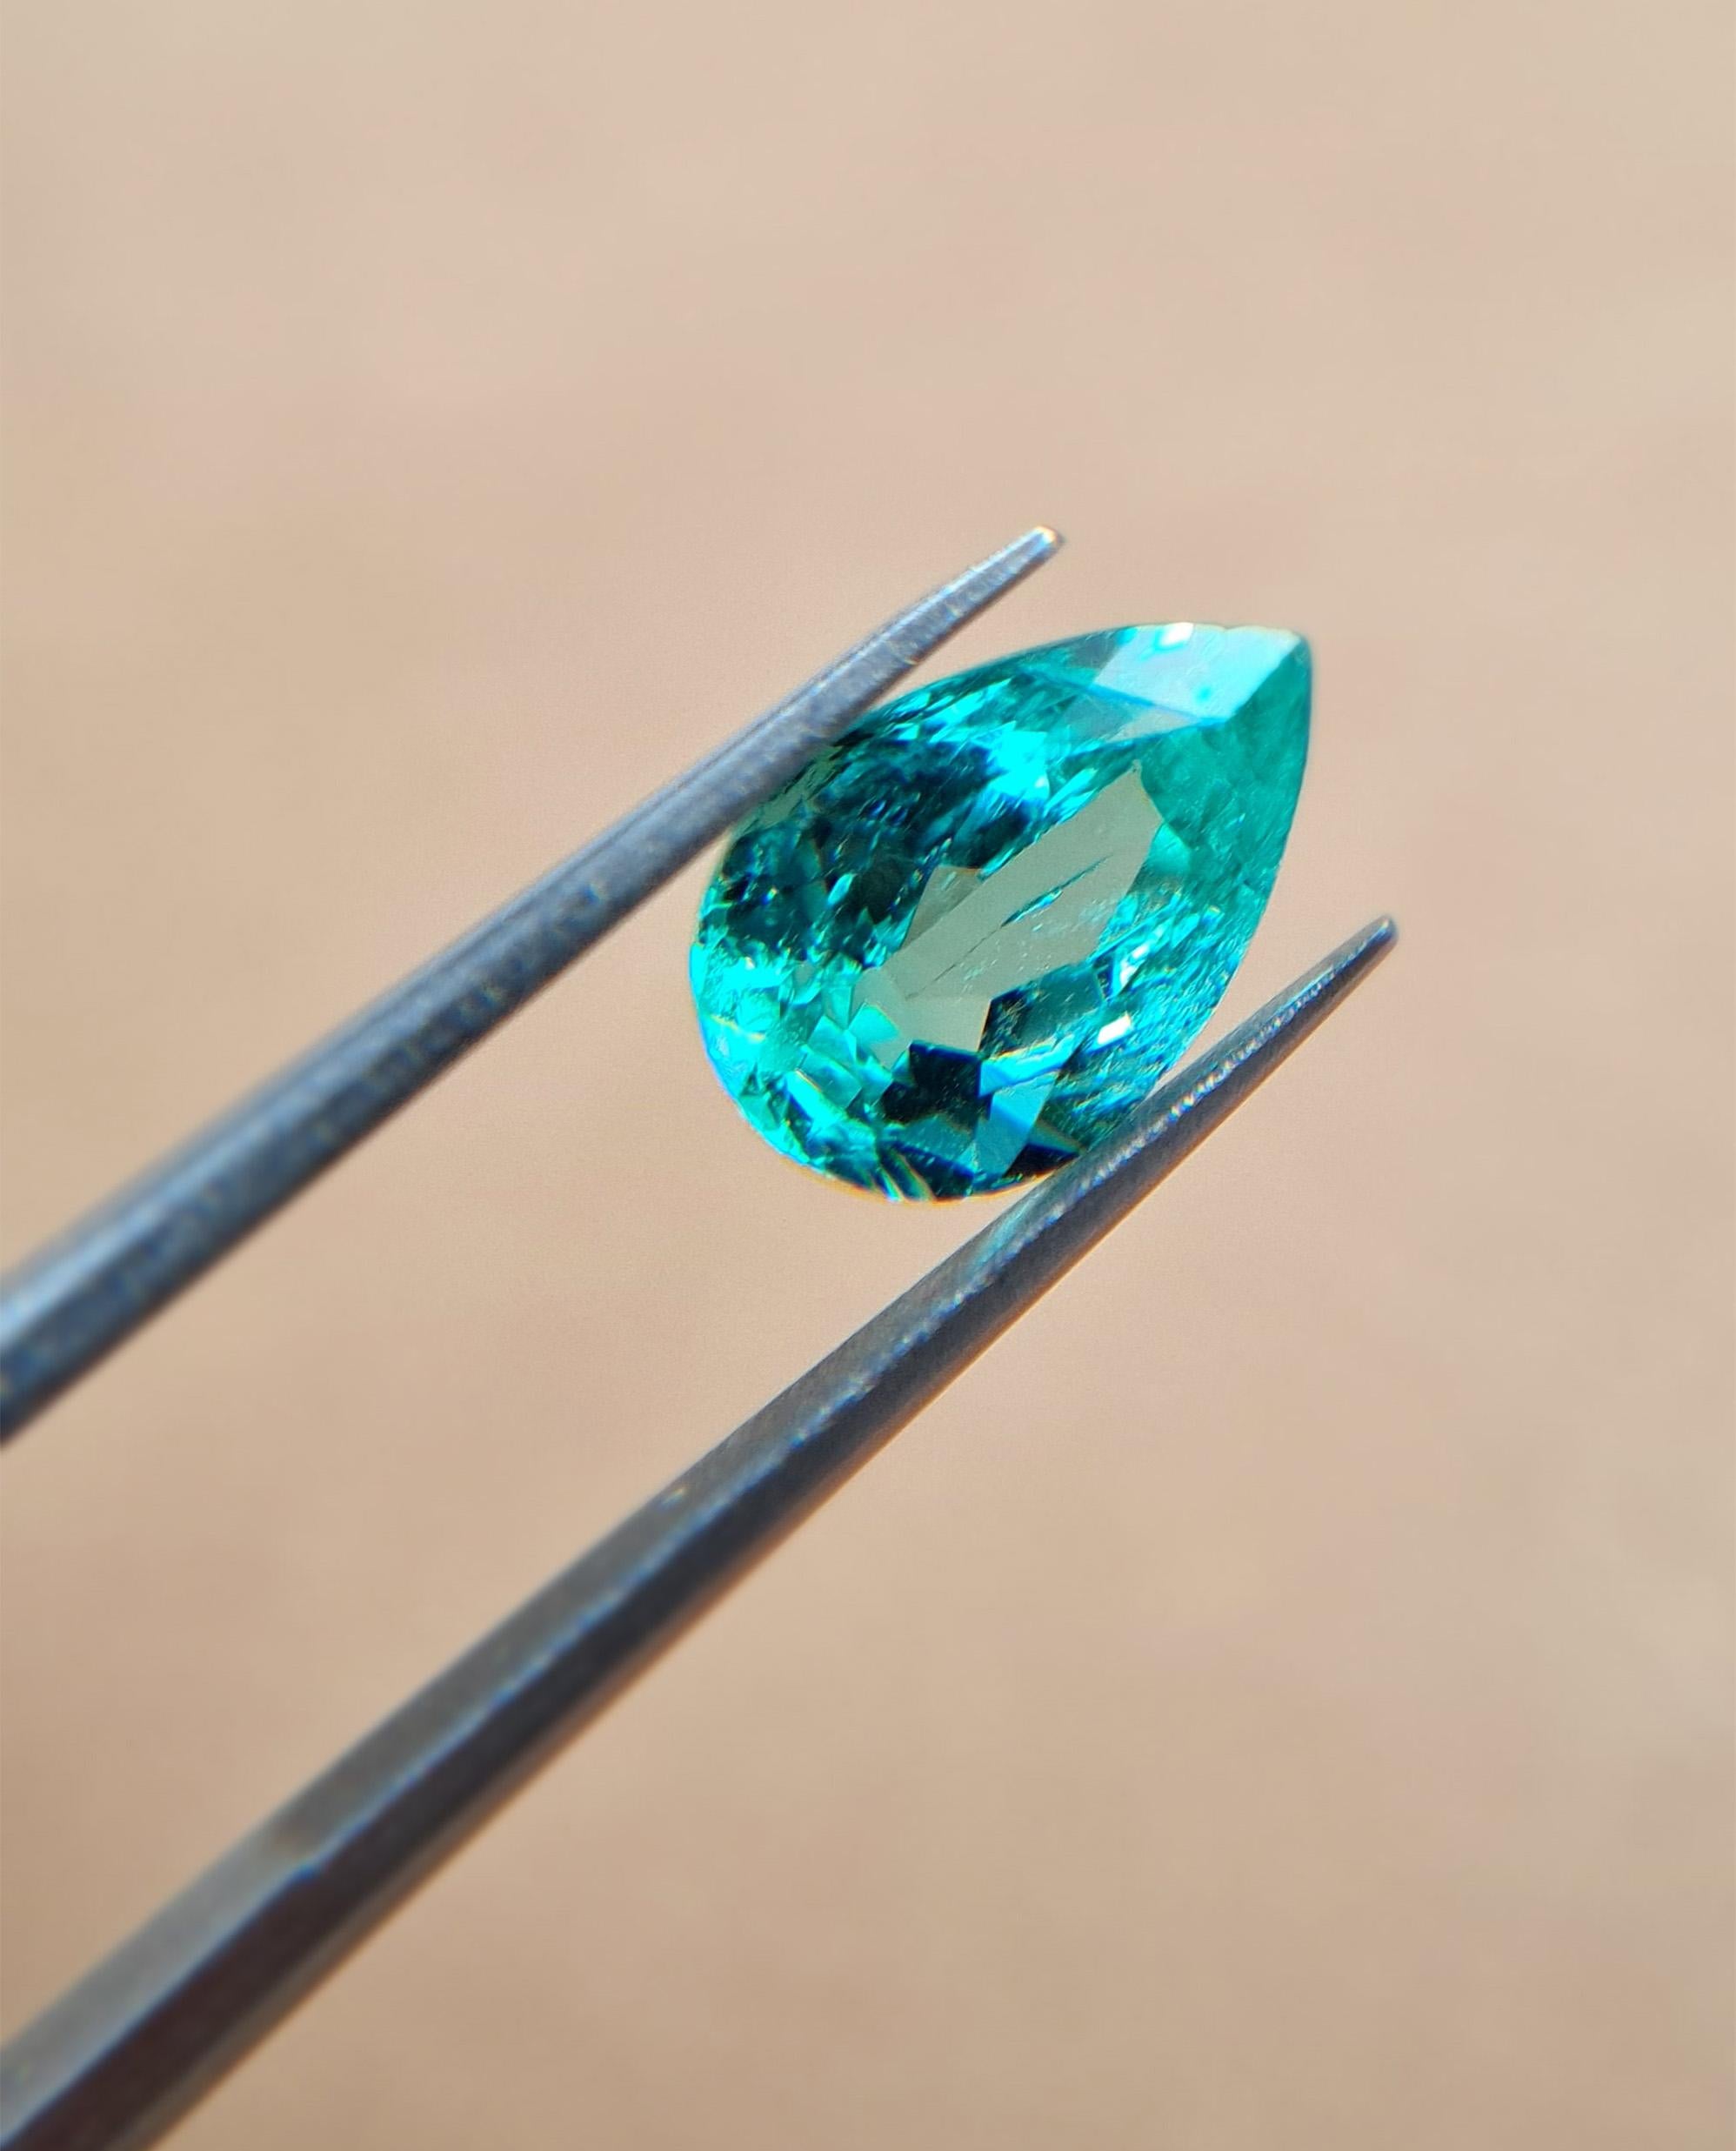 Bright 2.12 carat natural pear-shaped emerald with minor oil treatment. This beautiful stone would be the perfect fit for a lovely ring or pendant to add a splash of colour to your life.

We specialise in colour gemstones and offer a bespoke